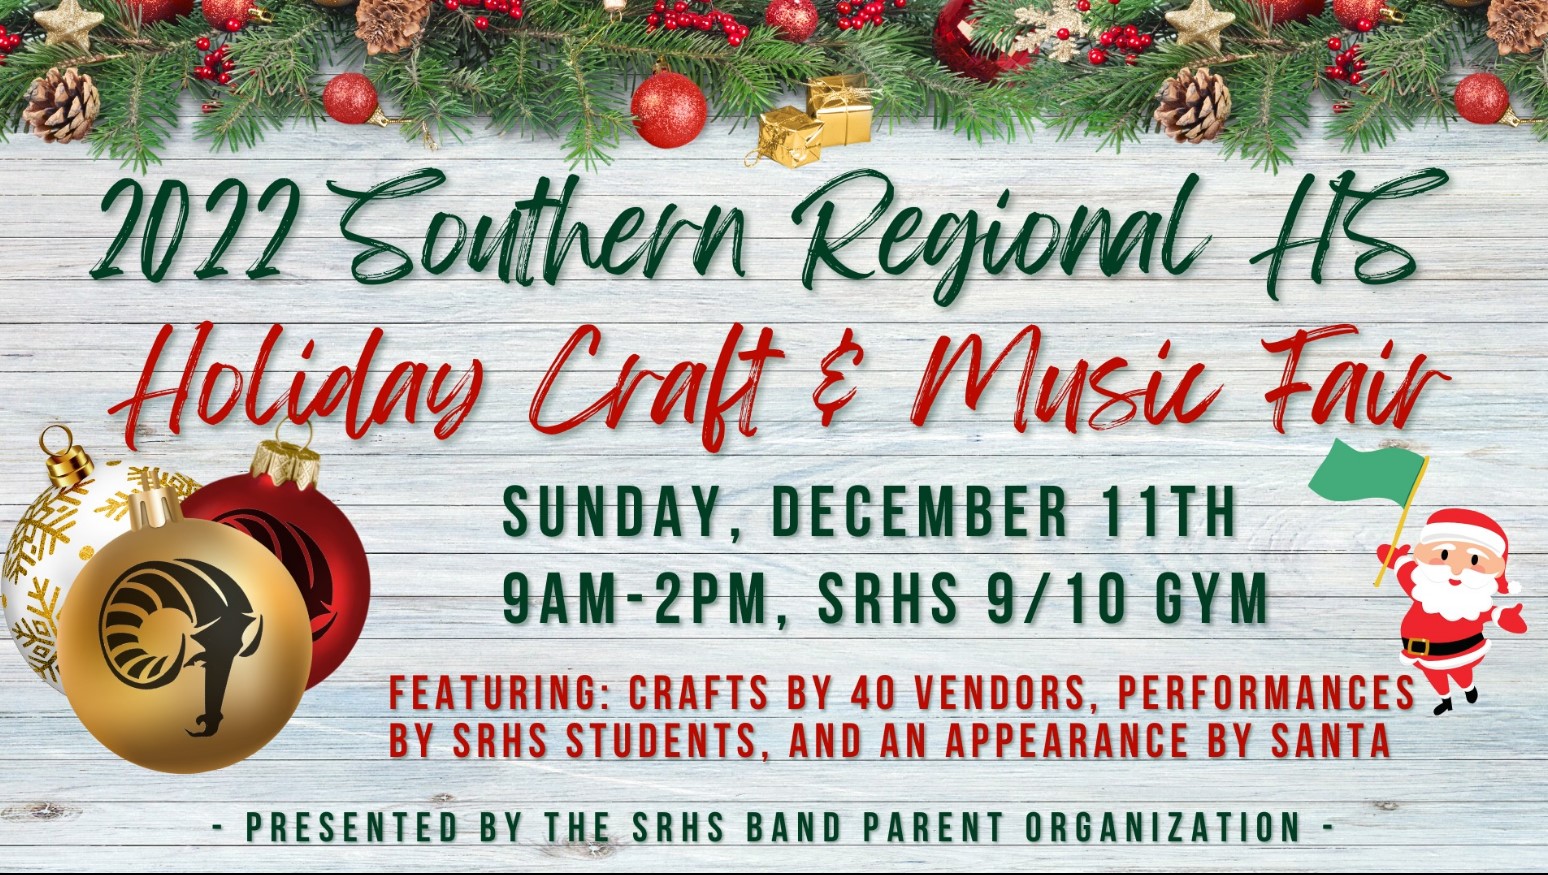 Southern Regional HS Holiday Craft & Music Fair Ocean County Tourism